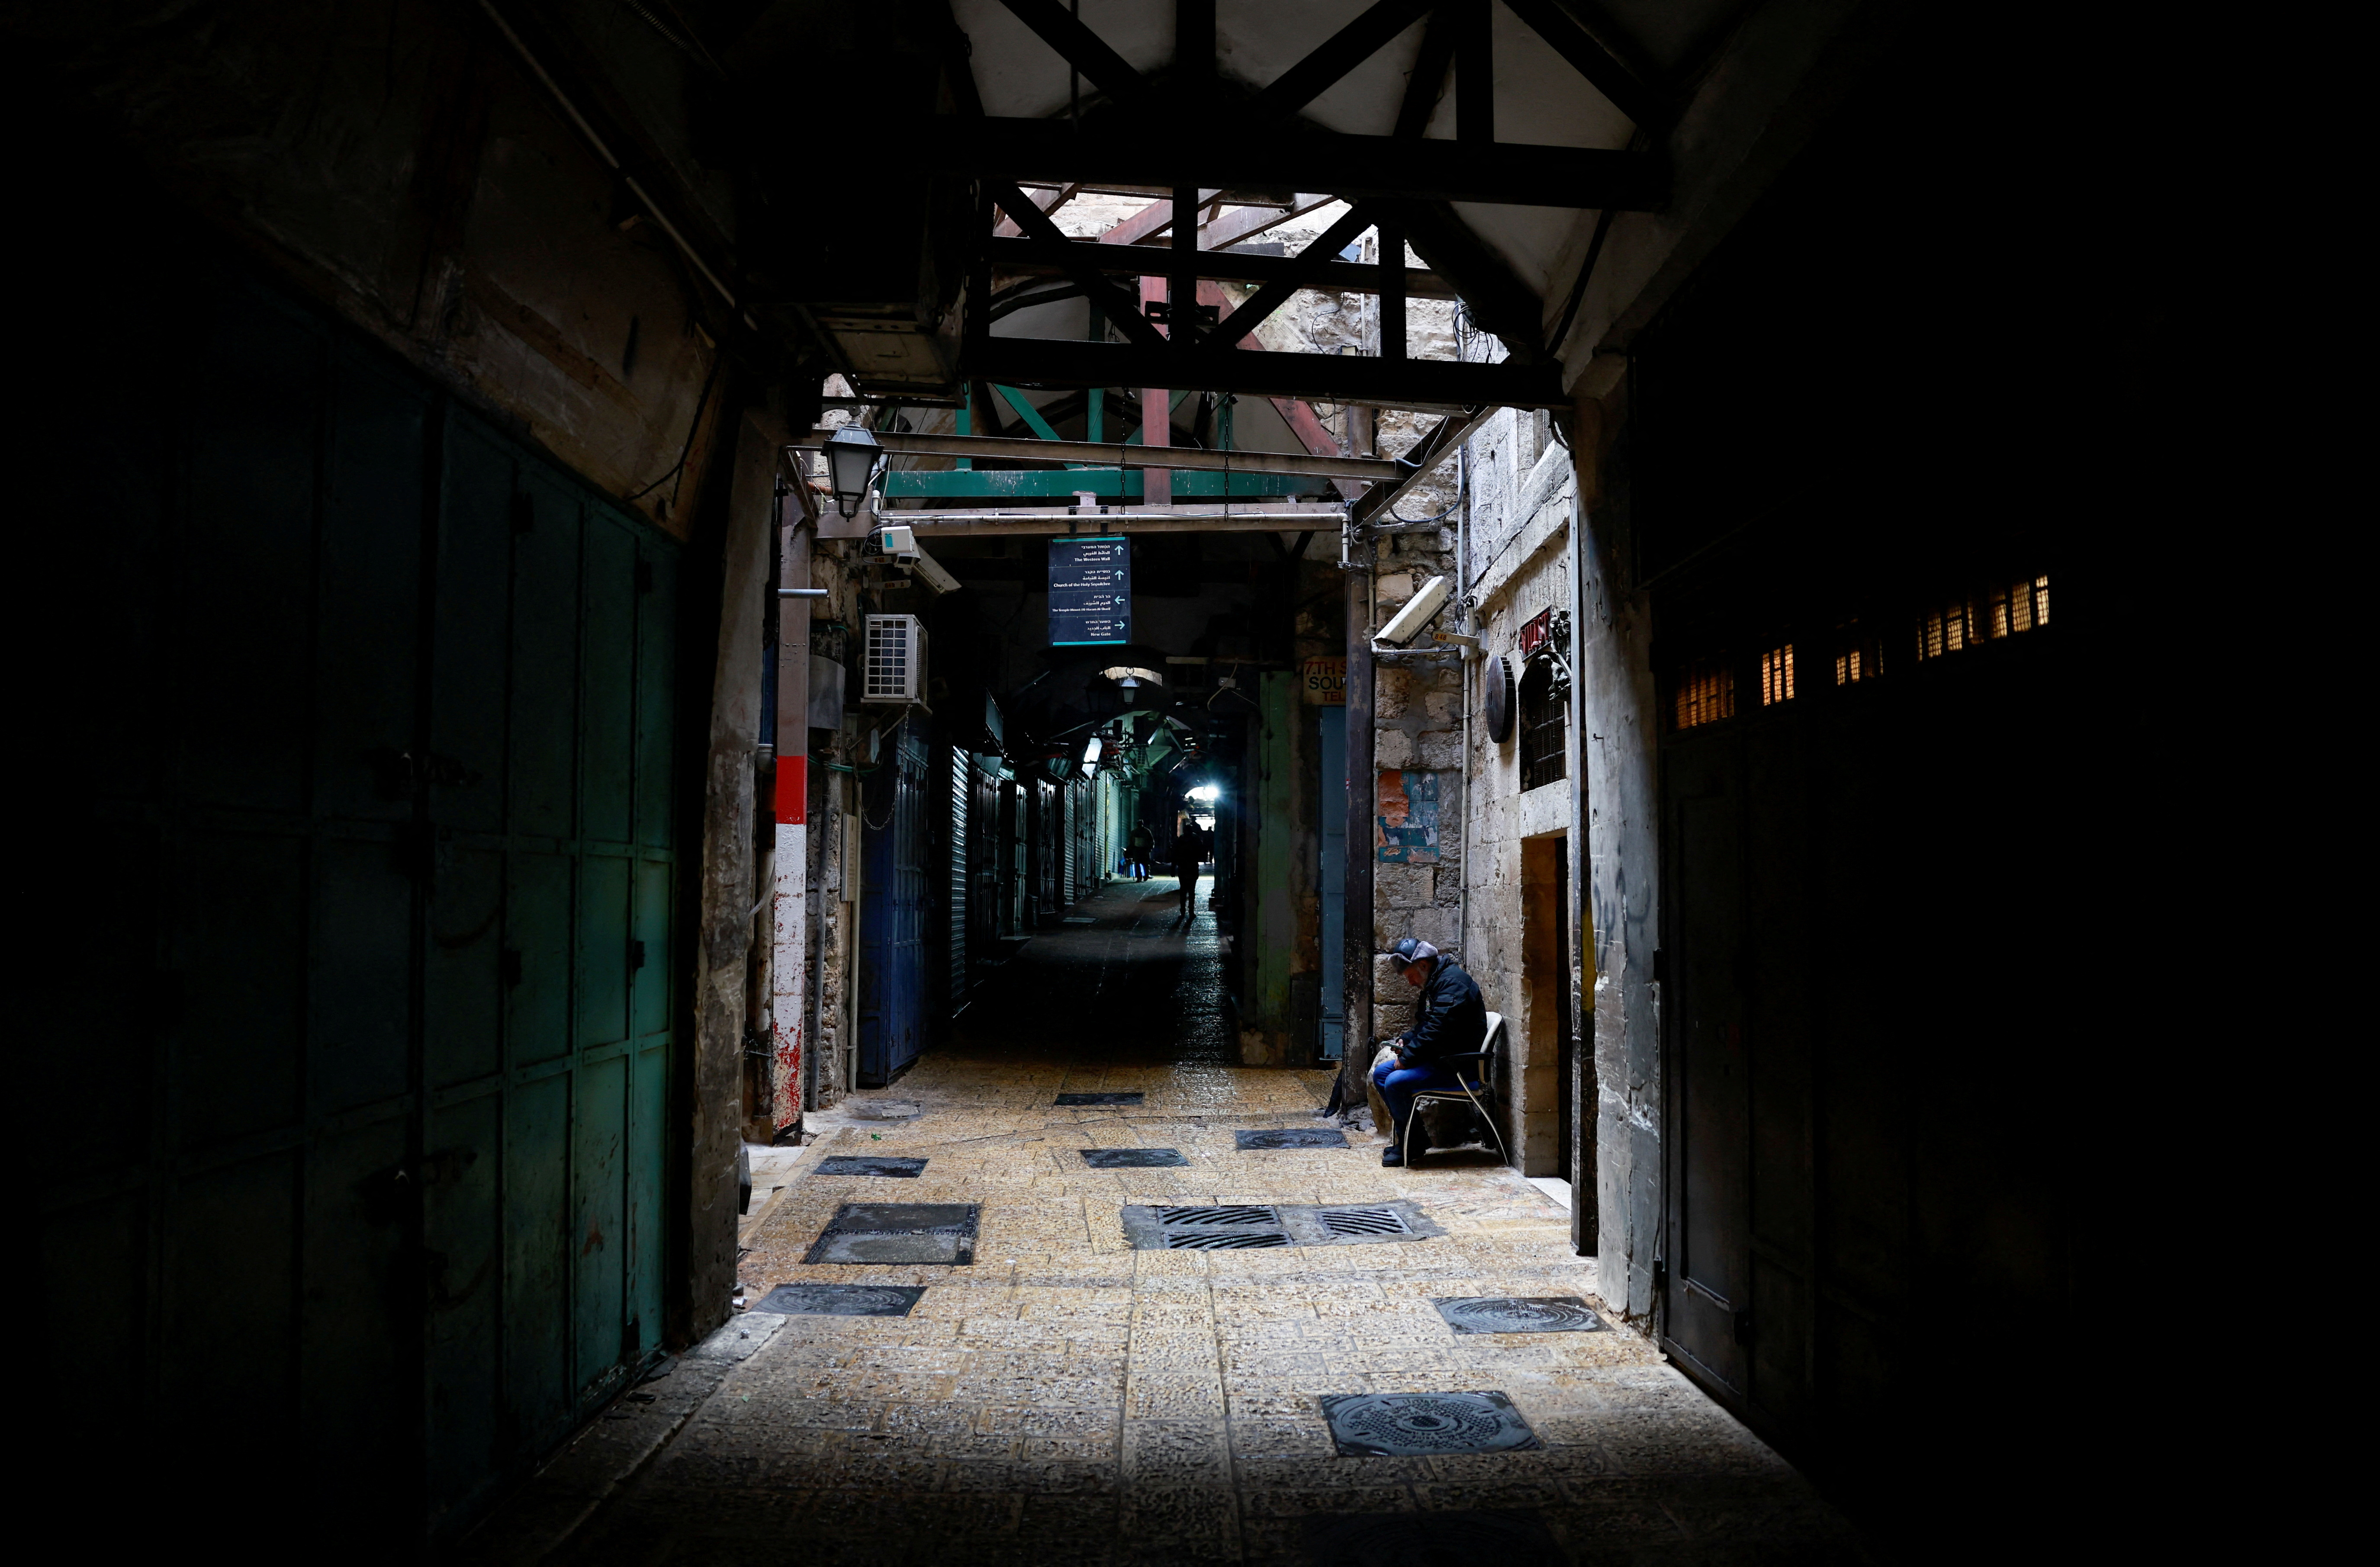 Shops close during strike in protest after killing of Arouri, in Jerusalem's Old City